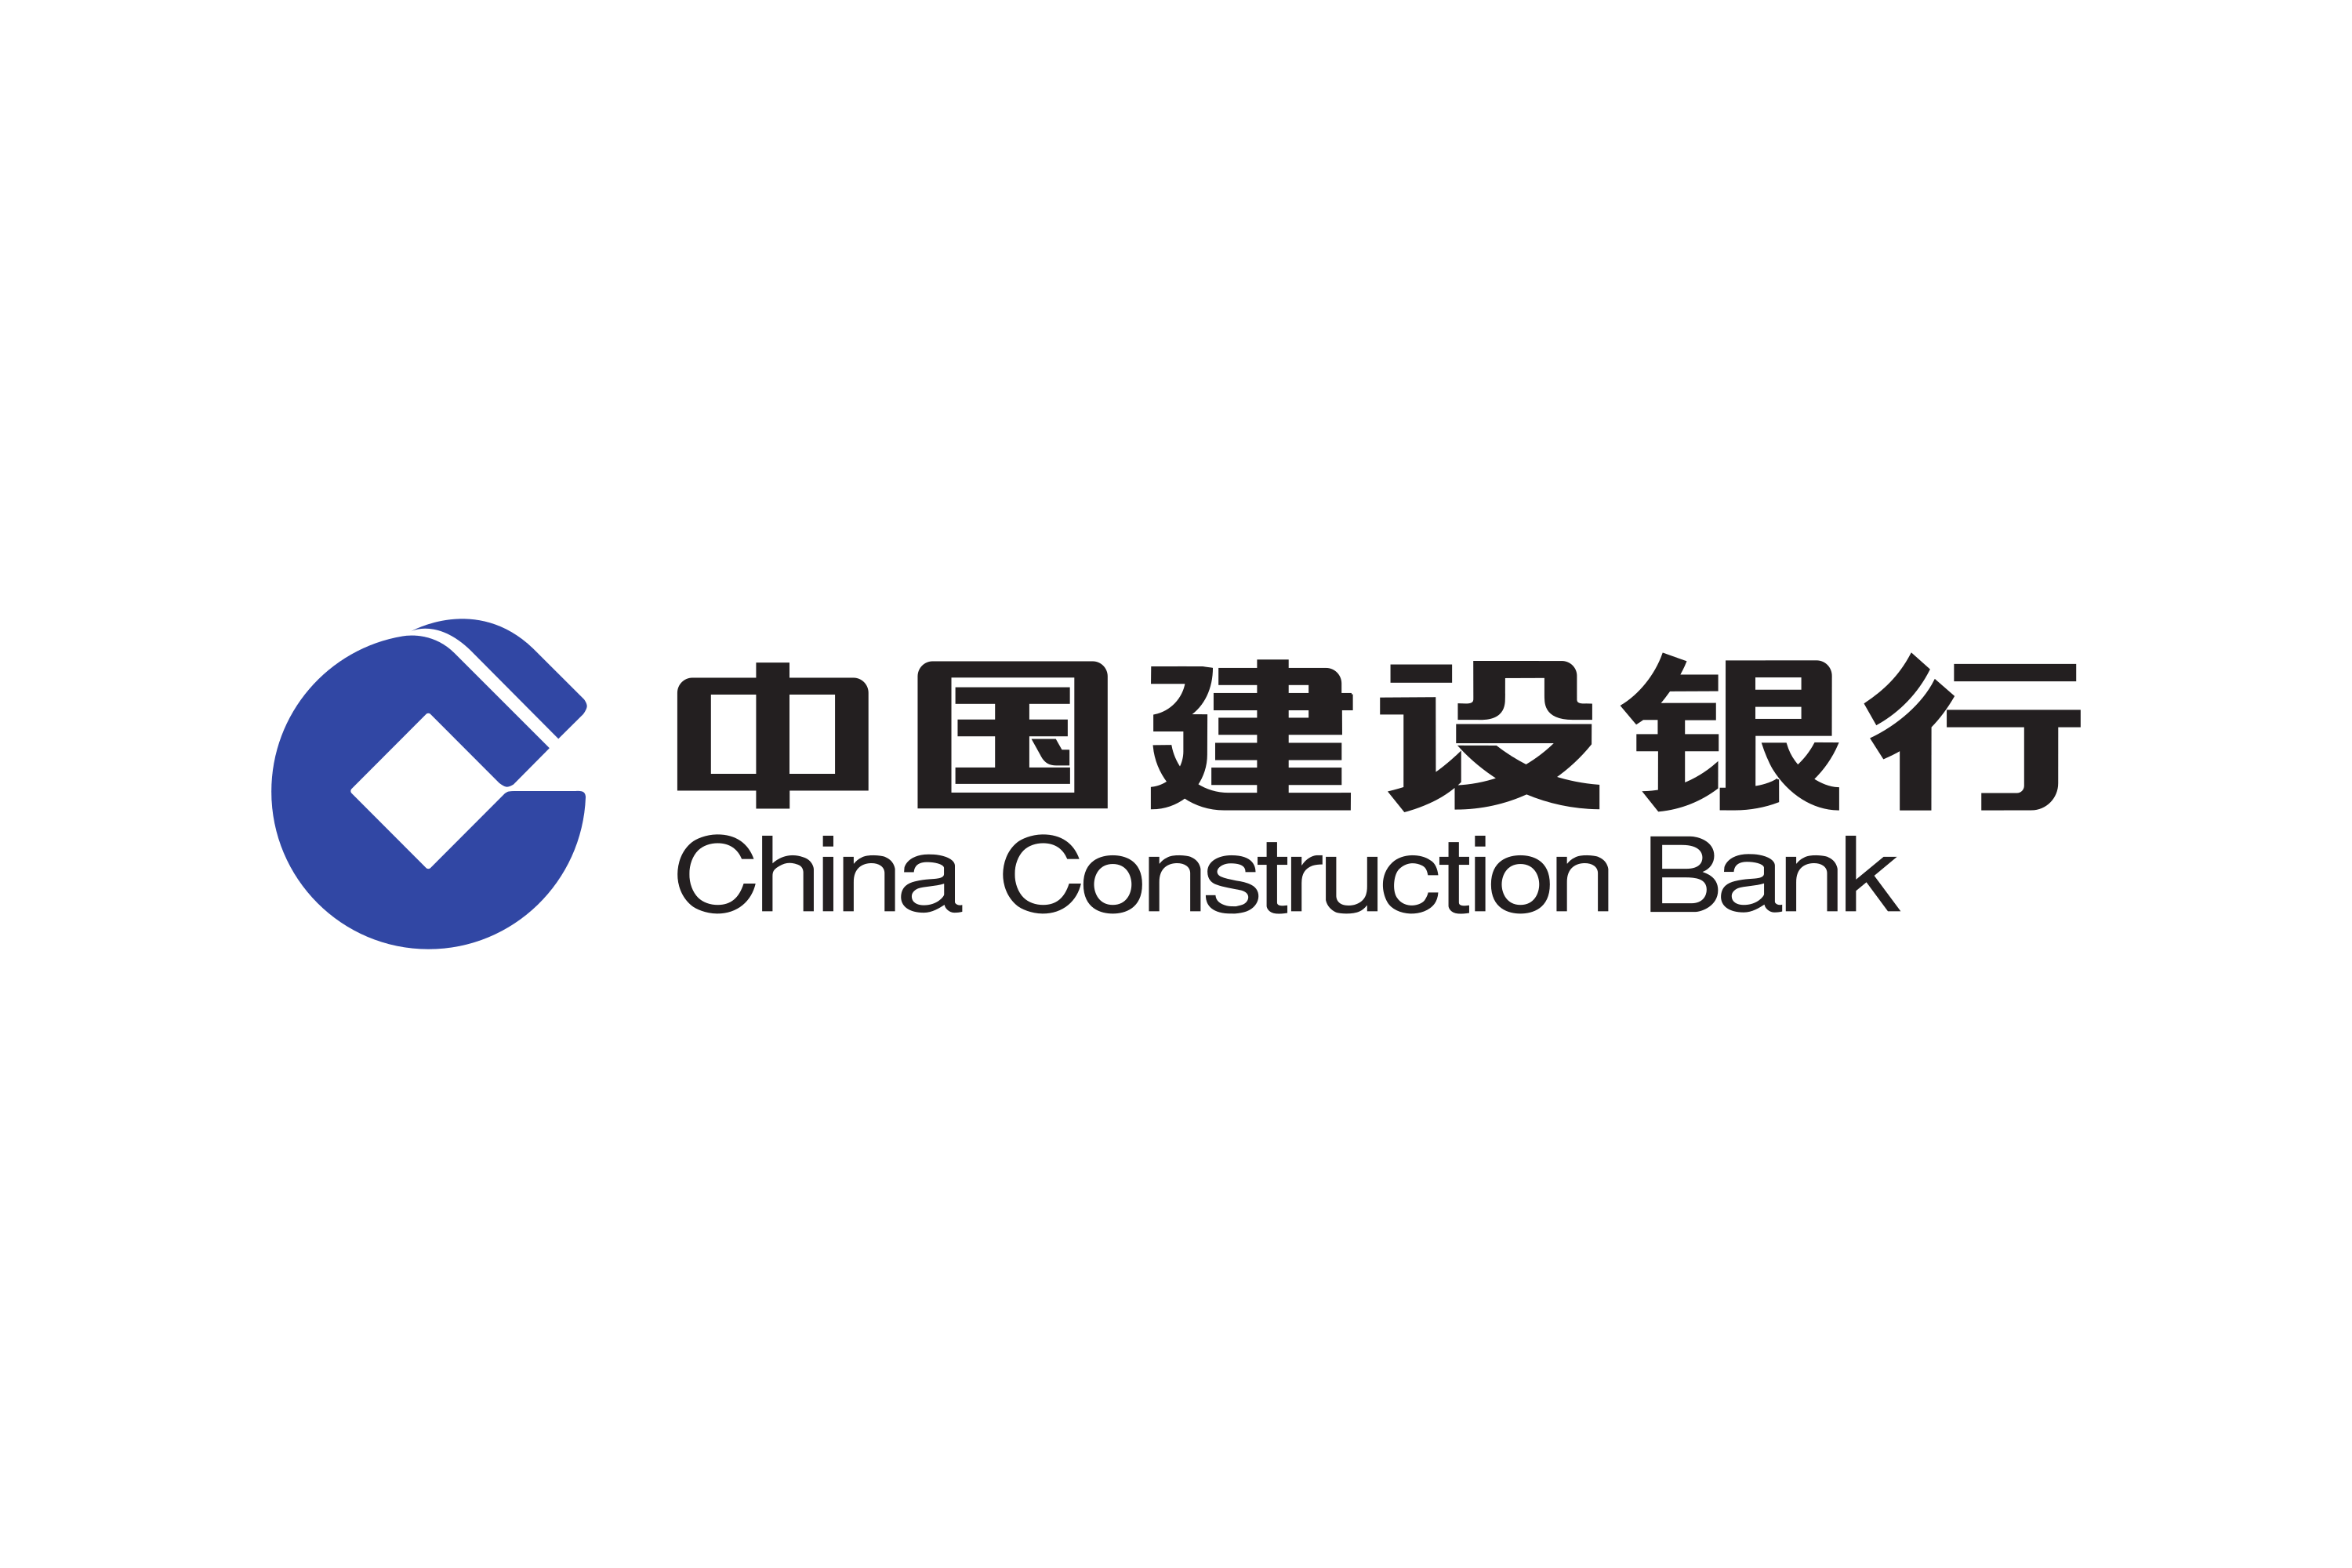 Download China Construction Bank Logo in SVG Vector or PNG File Format